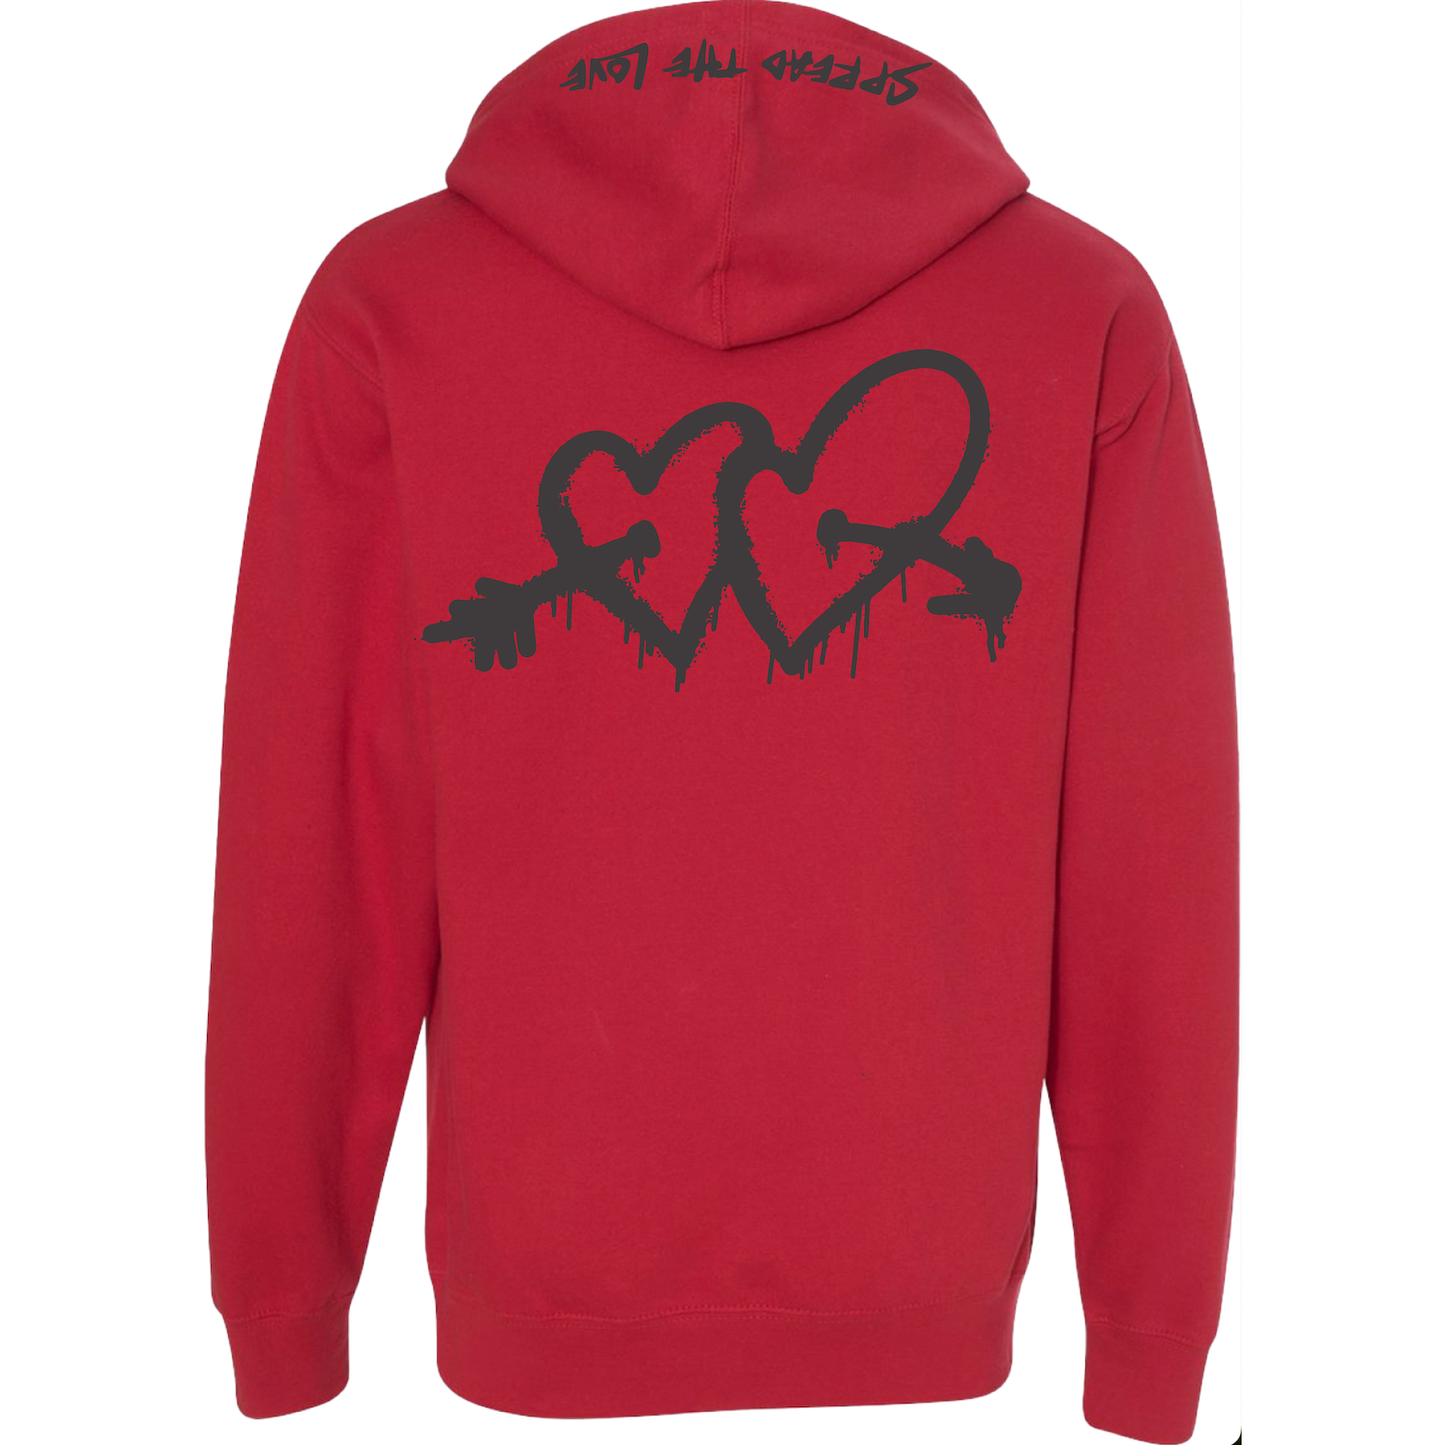 First Edition AC3 Spread the Love Red Hoodie